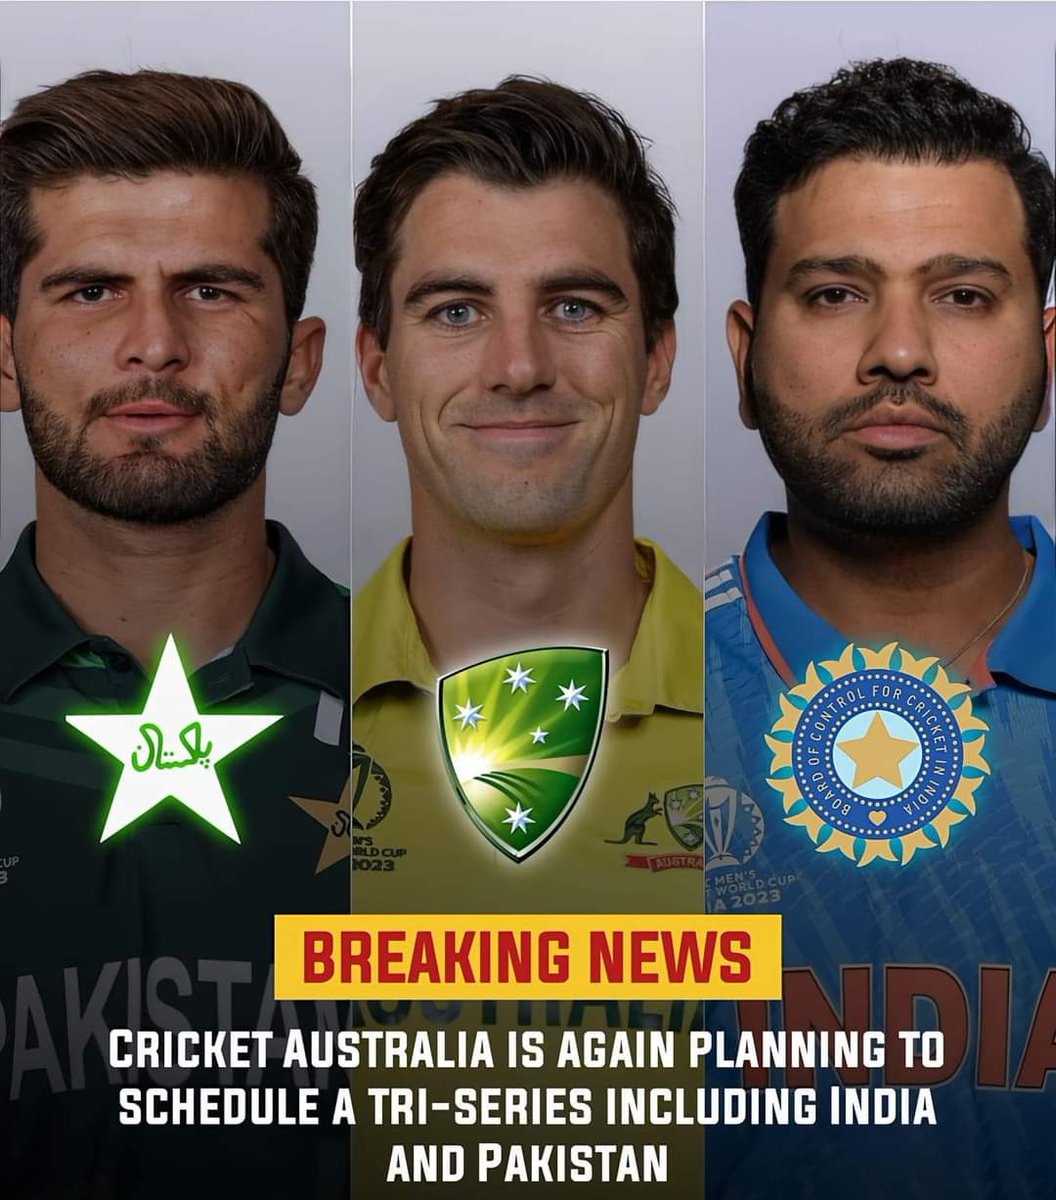 Yeah bring back the tri series, loved the format as well, odi’s were at their peak during the tri series system🥰❤️
#PAKvsAUS #INDvAUS